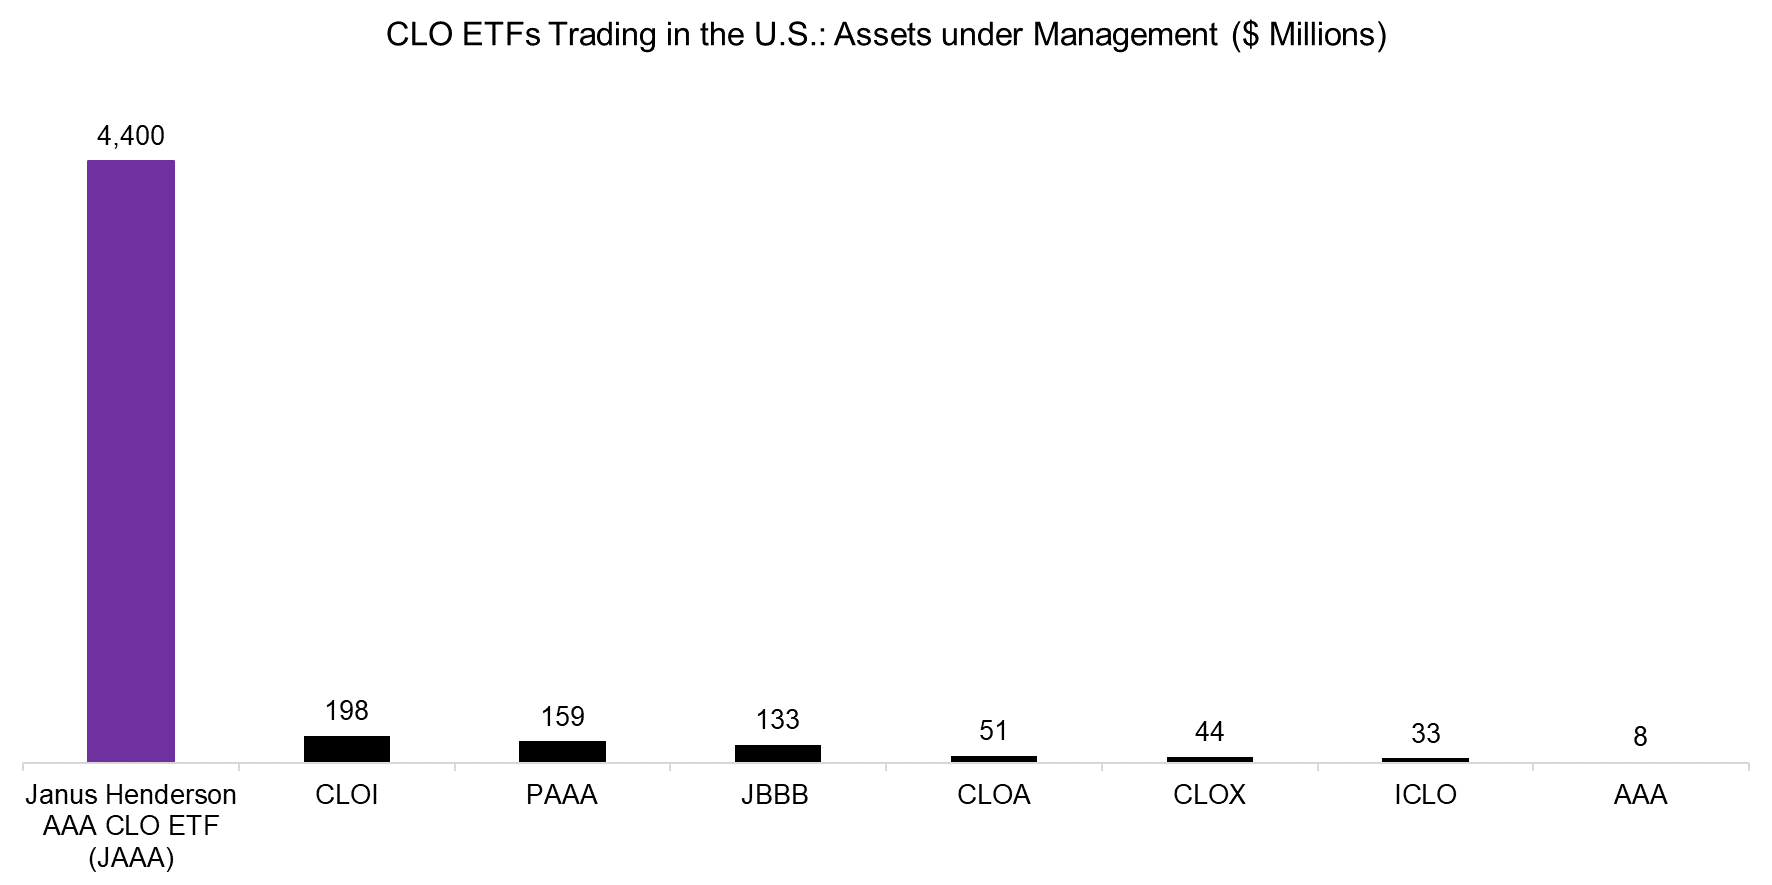 CLO ETFs Trading in the U.S. Assets under Management ($ Millions)